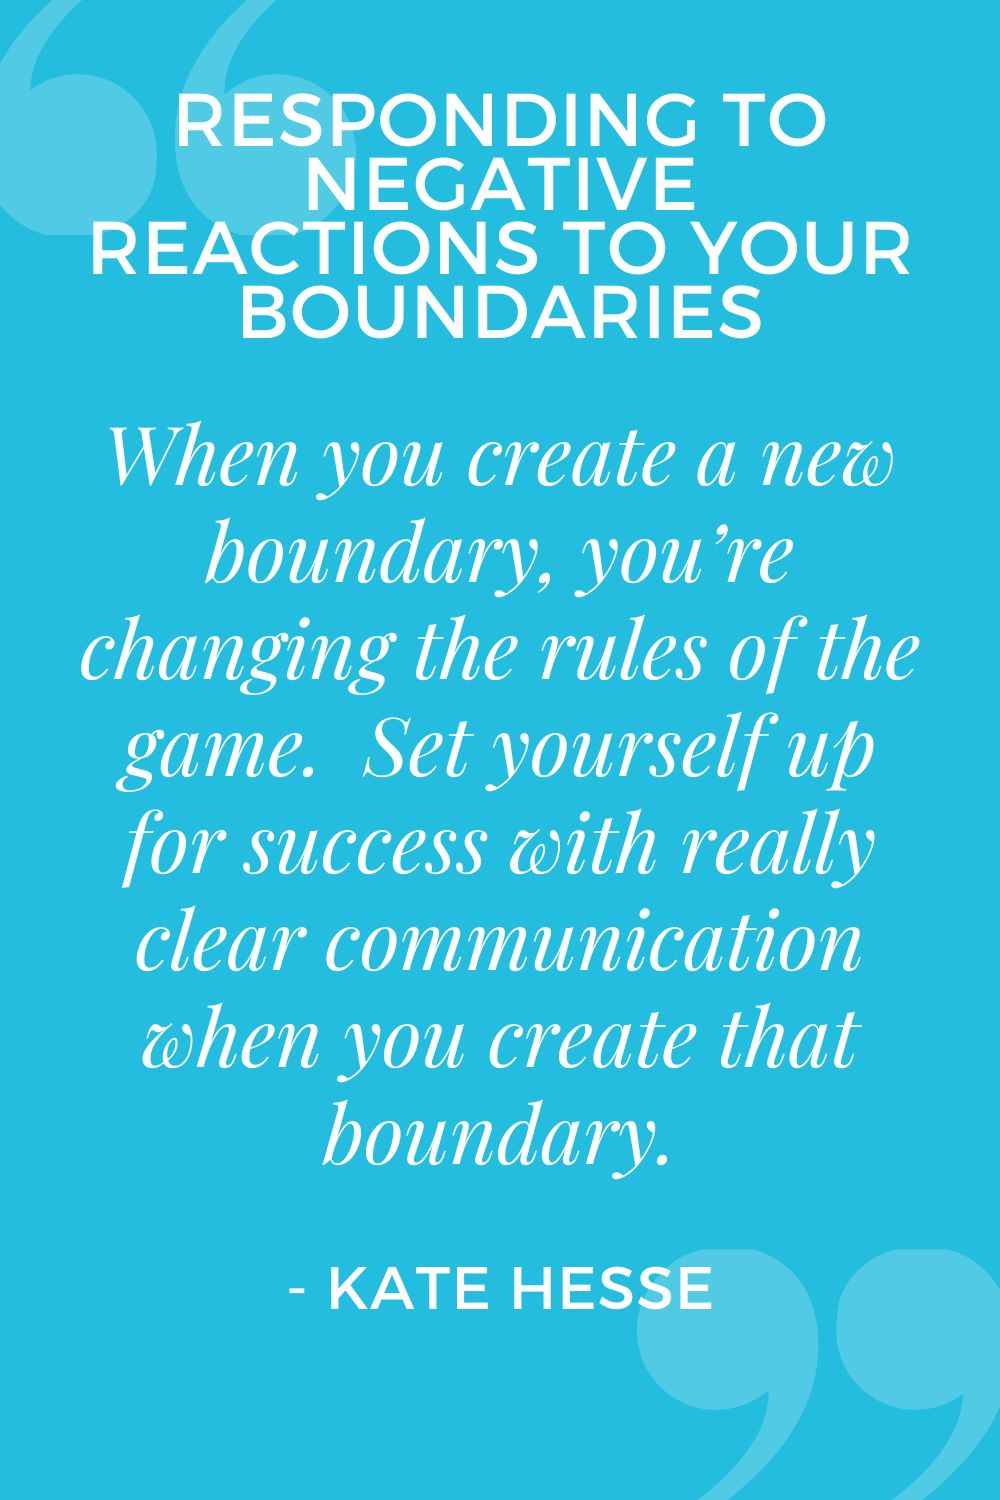 When you create a new boundary, you're changing the rules of the game. Set yourself up for success with really clear communication when you create that boundary.